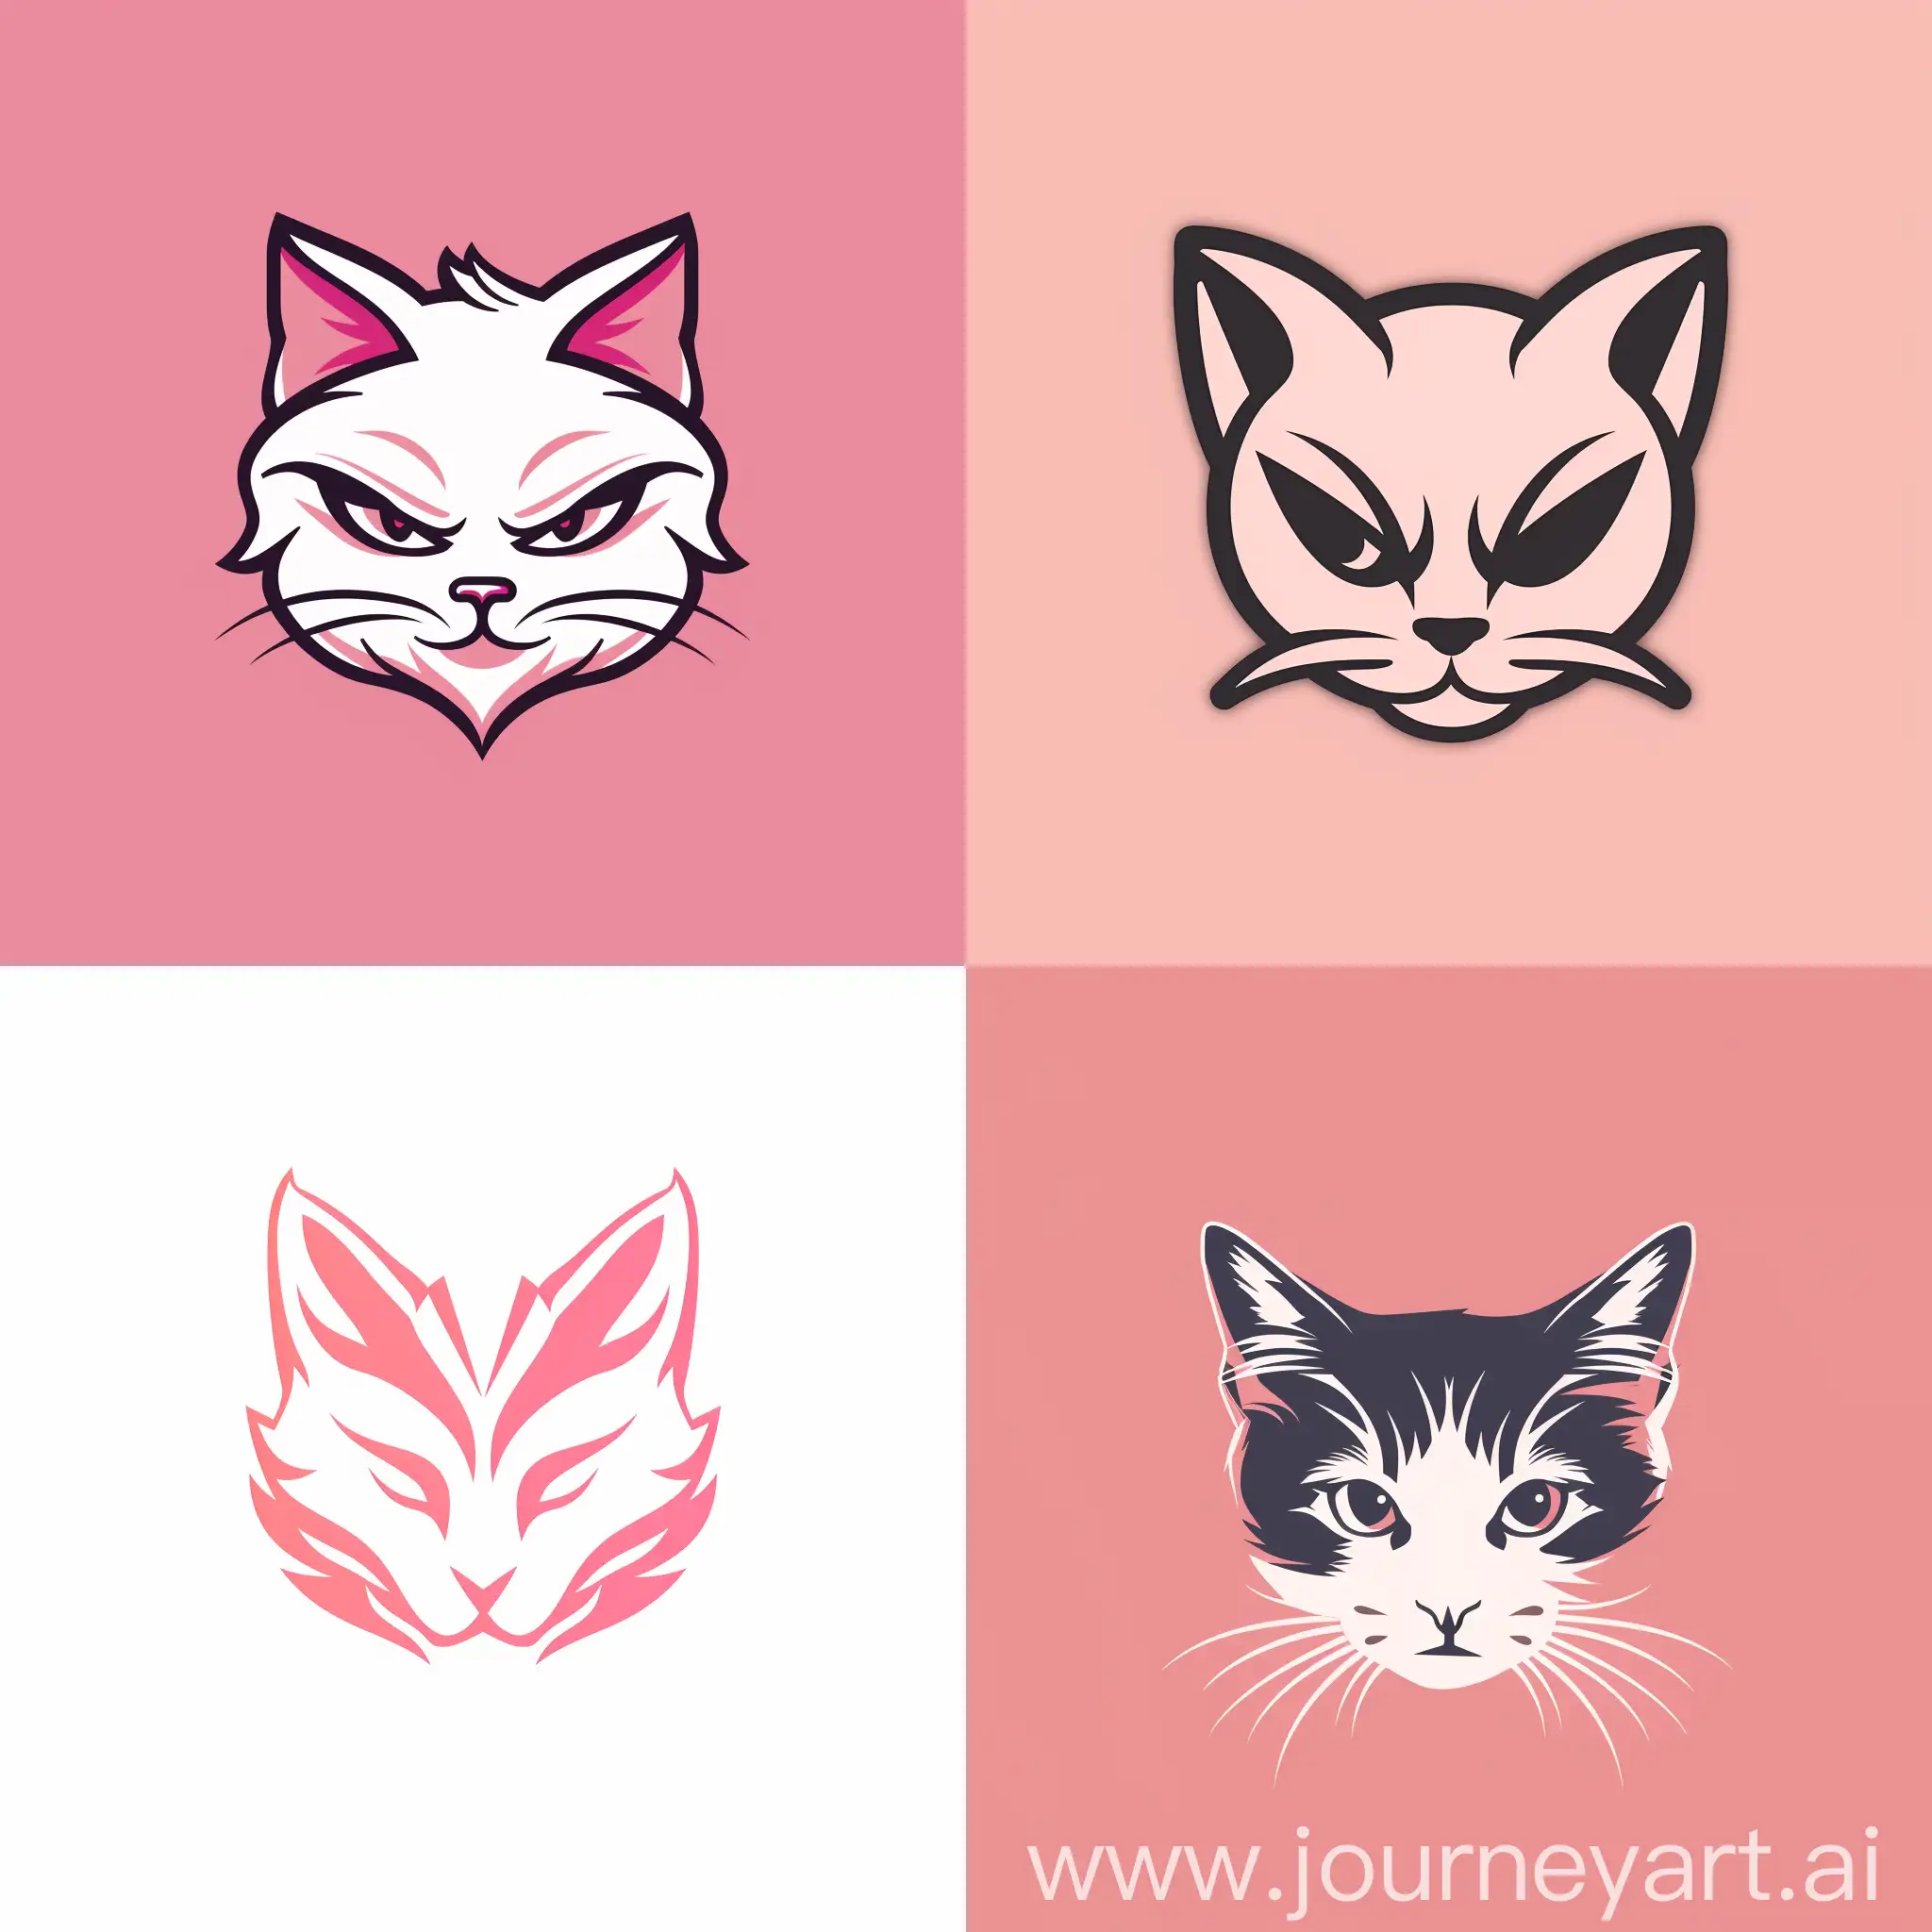 Minimalistic-Family-Logo-in-Soft-Pinkish-Tones-with-GTA-5-Elements